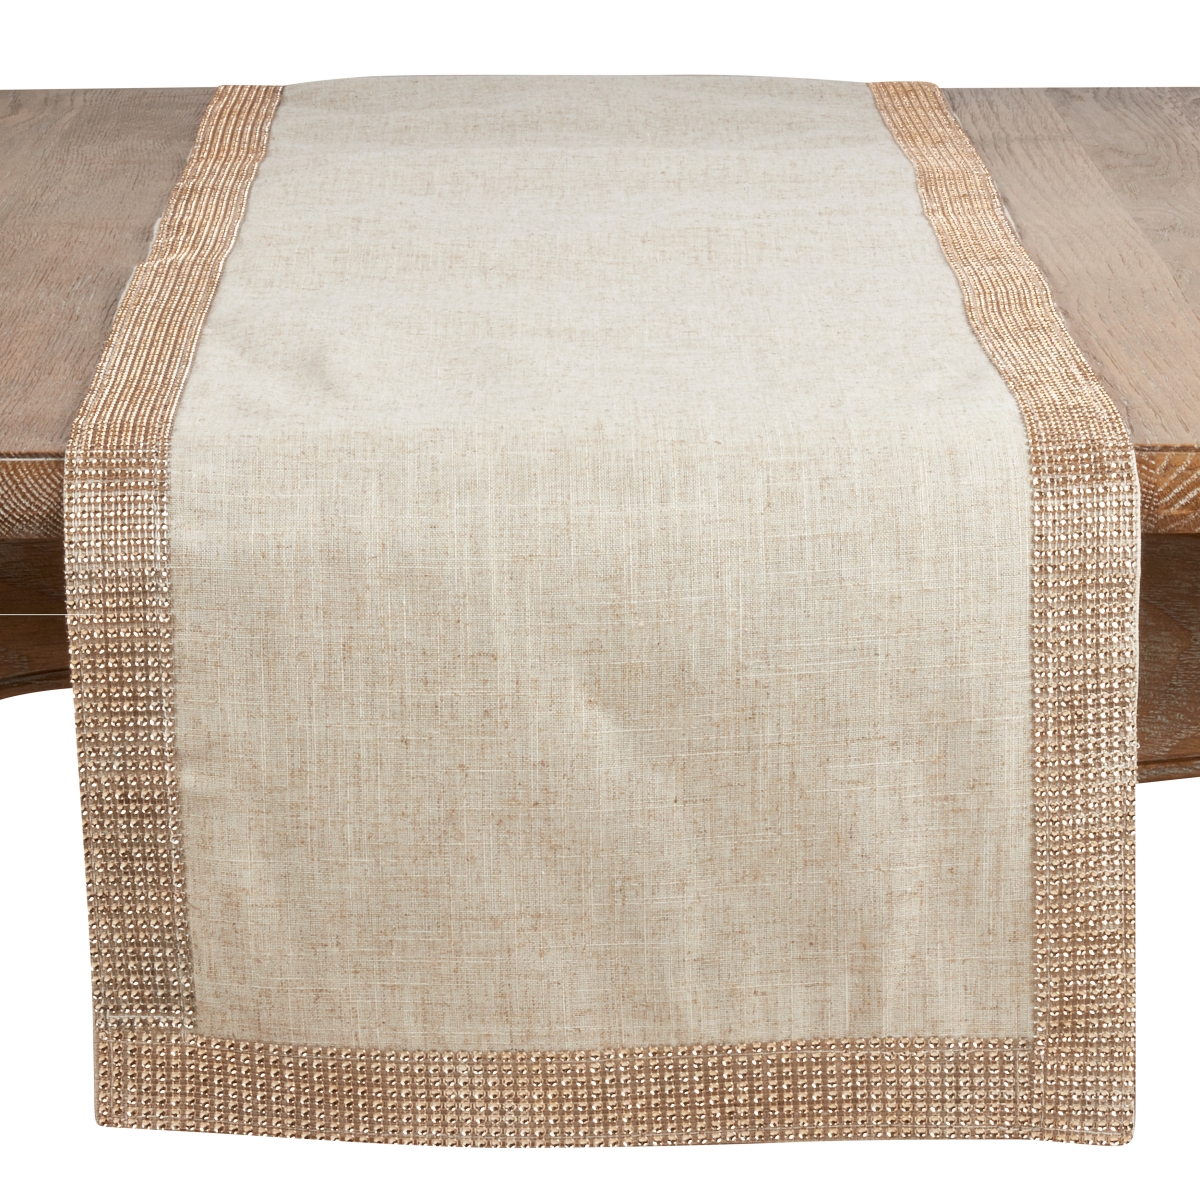 Picture of Saro Lifestyle 315.CH16120B 16 x 120 in. Studded Design Oblong Table Runner, Champagne